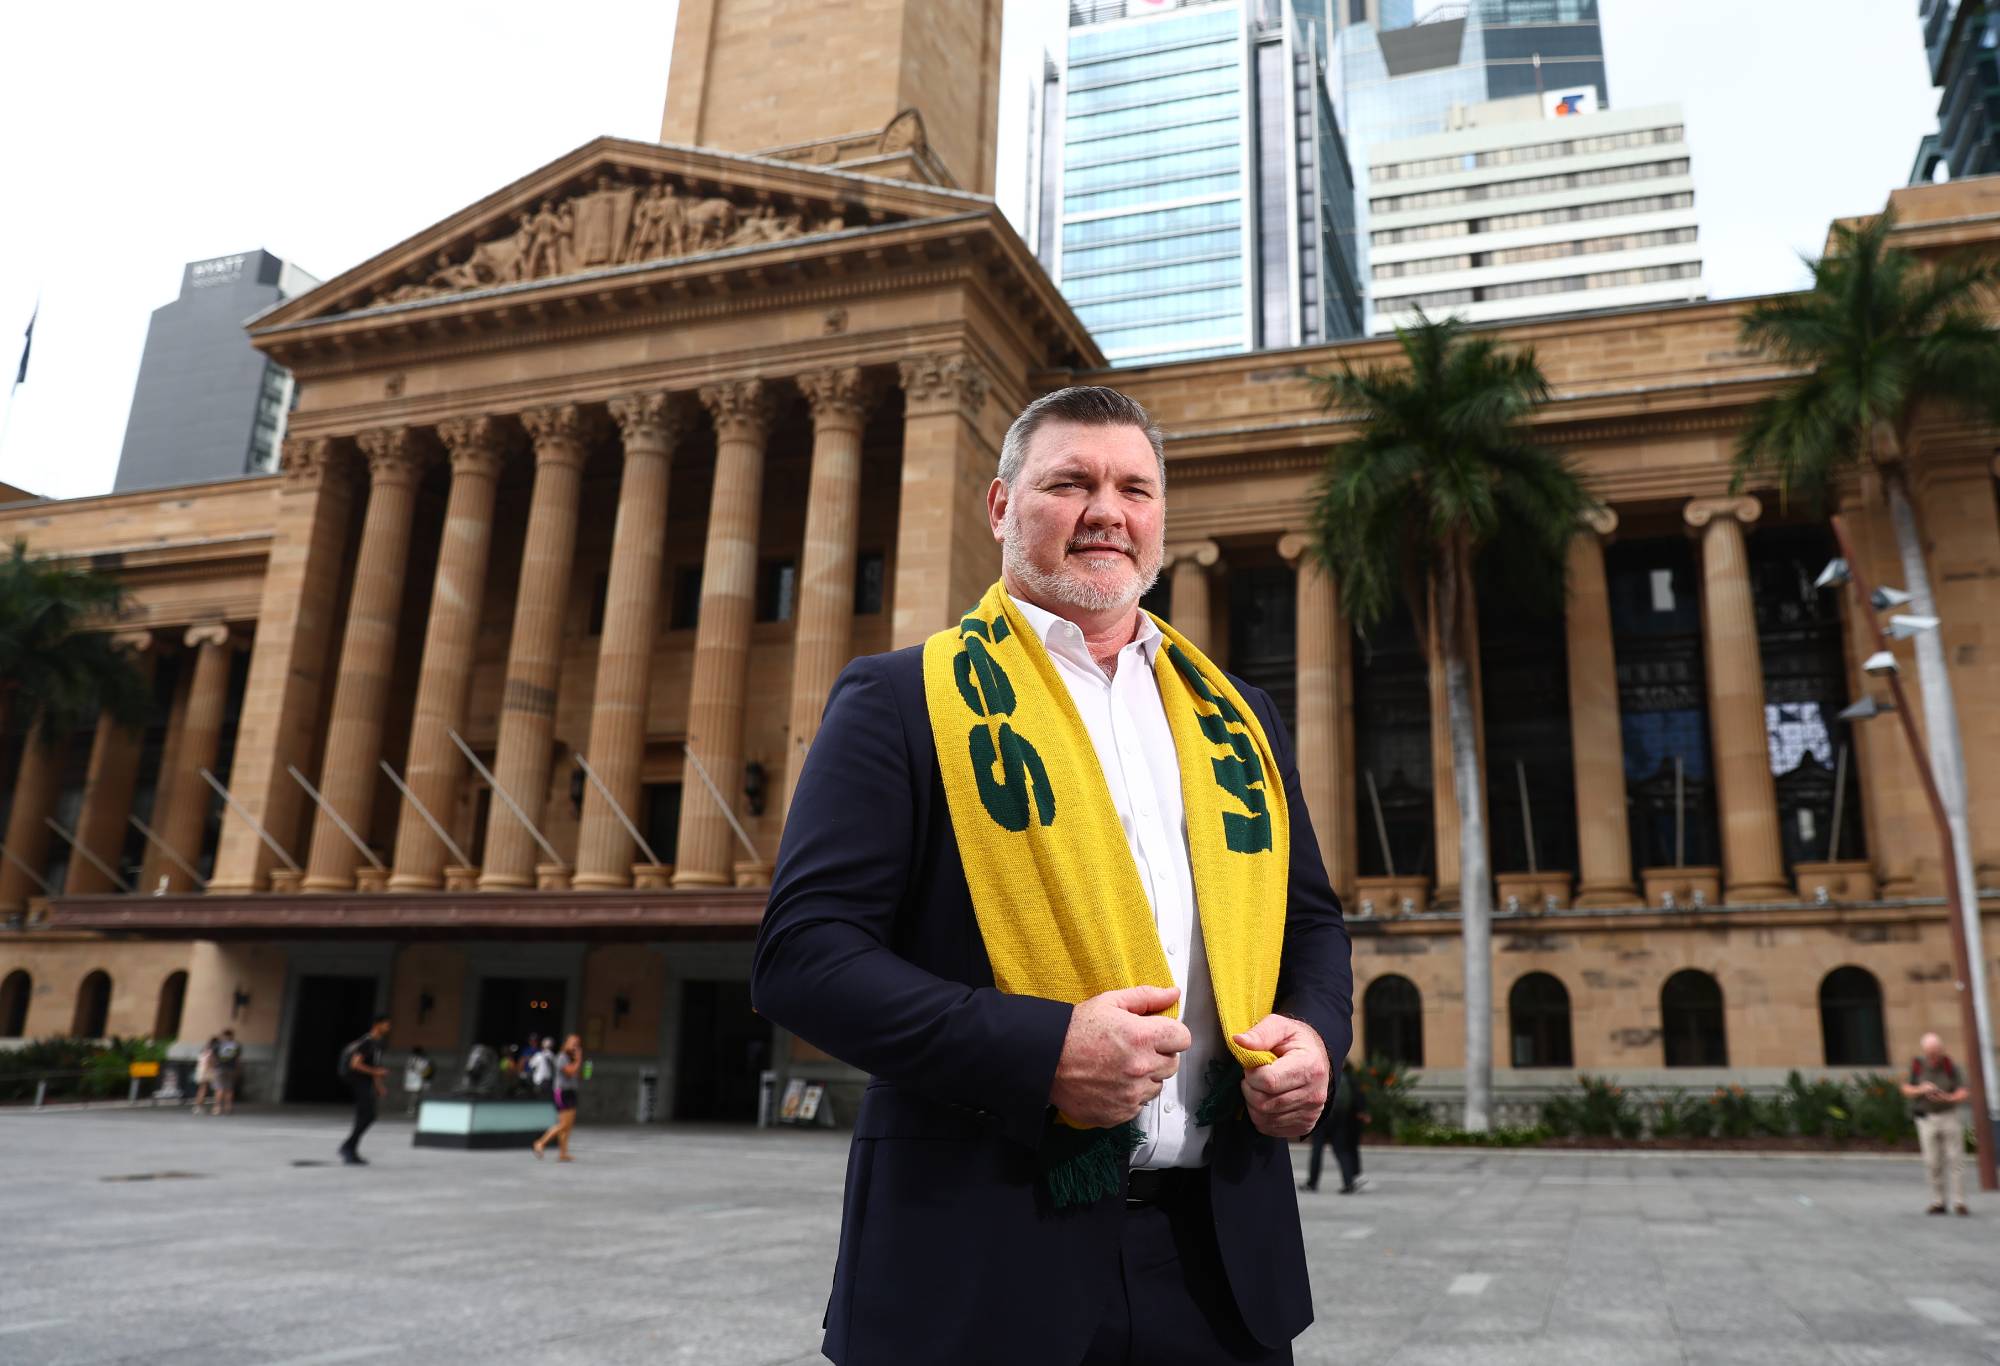 Rugby Australia Chair Dan Herbert poses during the British & Irish Lions Tour of Australia Tickets On Sale National Media Opportunity at King George Square, Brisbane on March 18, 2024 in Brisbane, Australia. Rugby Australia today announced the ticket on sale dates for the 2025 British & Irish Lions tour of Australia. (Photo by Chris Hyde/Getty Images for Rugby Australia)